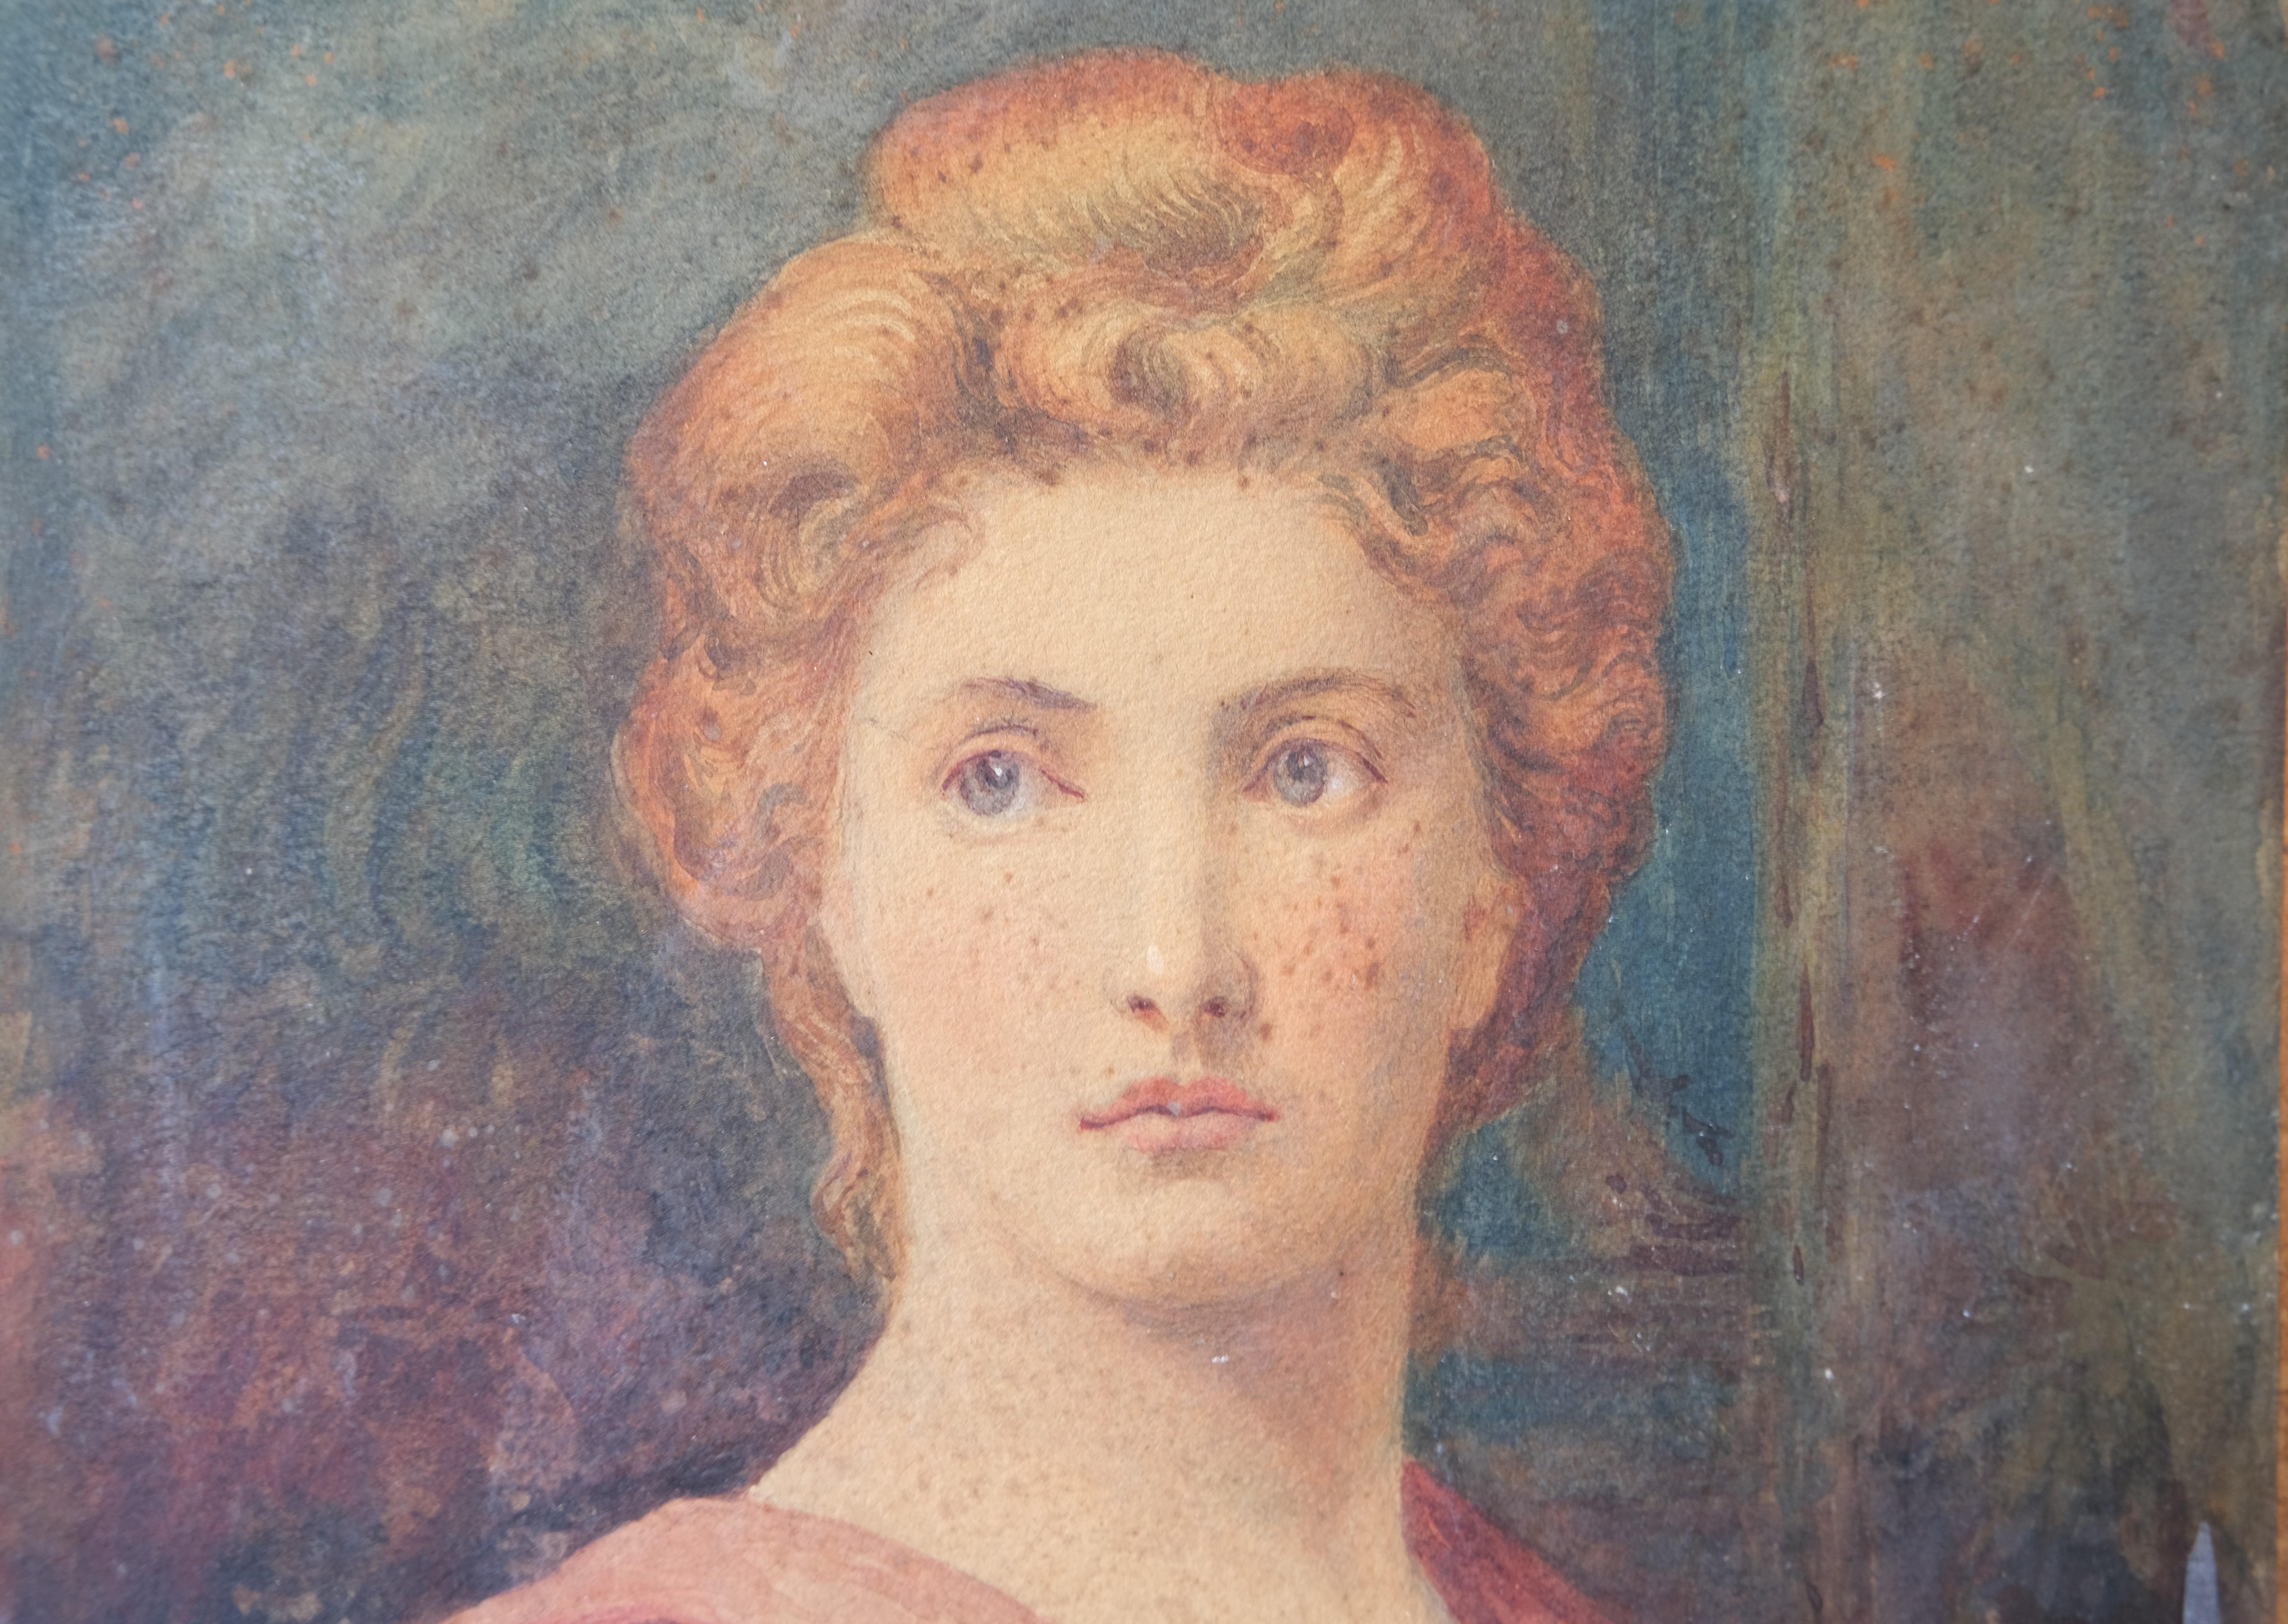 Offered for sale by Hutton-Clarke Antiques is this exquisite 19th-century watercolor portrait that subtly echoes the sensibilities of the Pre-Raphaelite movement, known for its attention to detail, vibrant colors, and emphasis on realism. Dated 1892